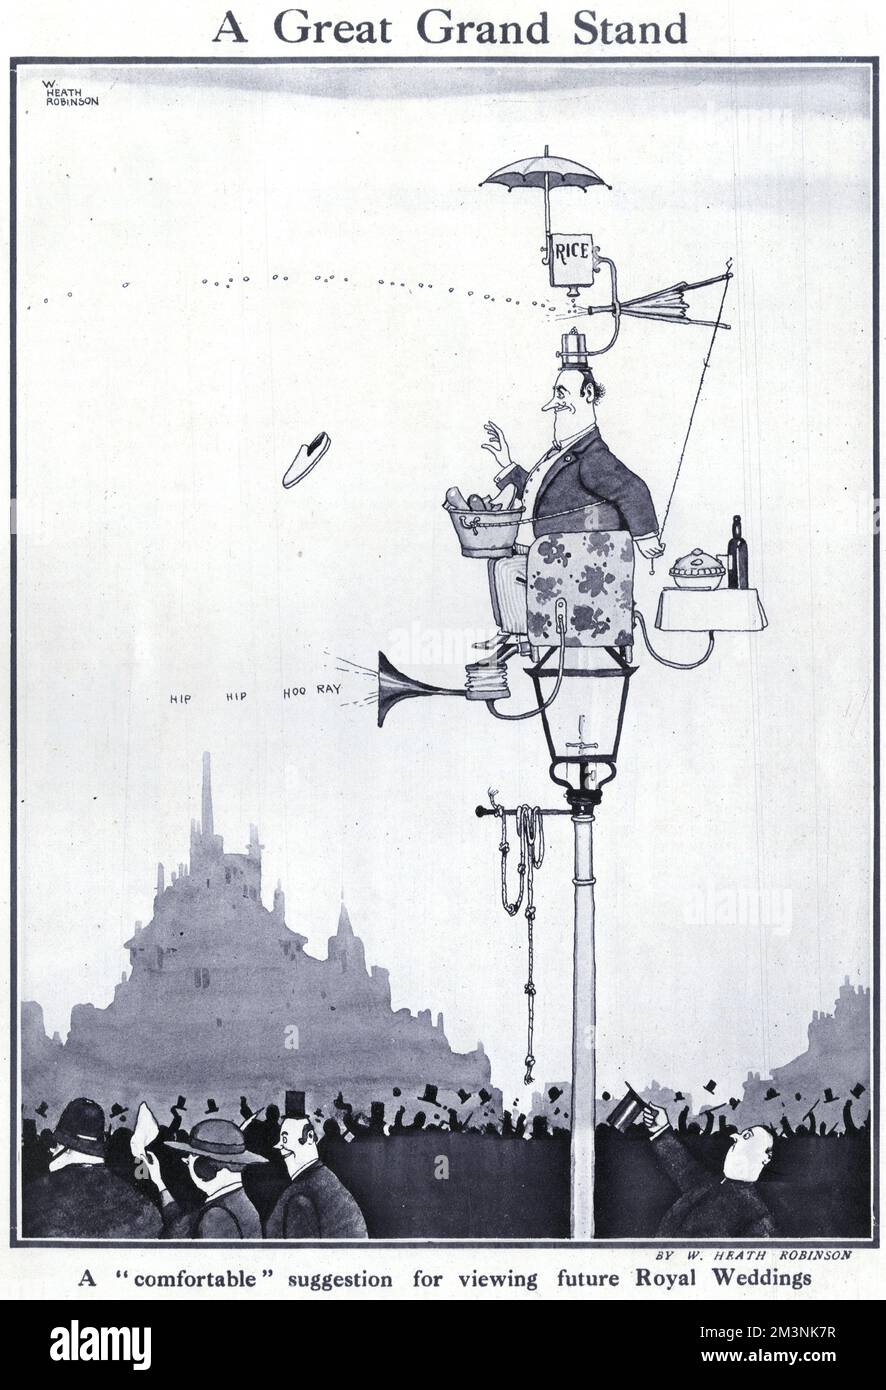 A Great Grand Stand.  A comfortable suggestion for viewing future Royal Weddings by William Heath Robinson.  An onlooker manages to balance a cosy armchair on top of a lamp post complete with rice throwing machine, a parasol (or umbrella), megaphone and a tasty pie and bottle of wine for sustenance.  Published in The Bystander Royal Wedding Number, celebrating the marriage of the Duke of York to Lady Elizabeth Bowes-Lyon in 1923.     Date: 1923 Stock Photo